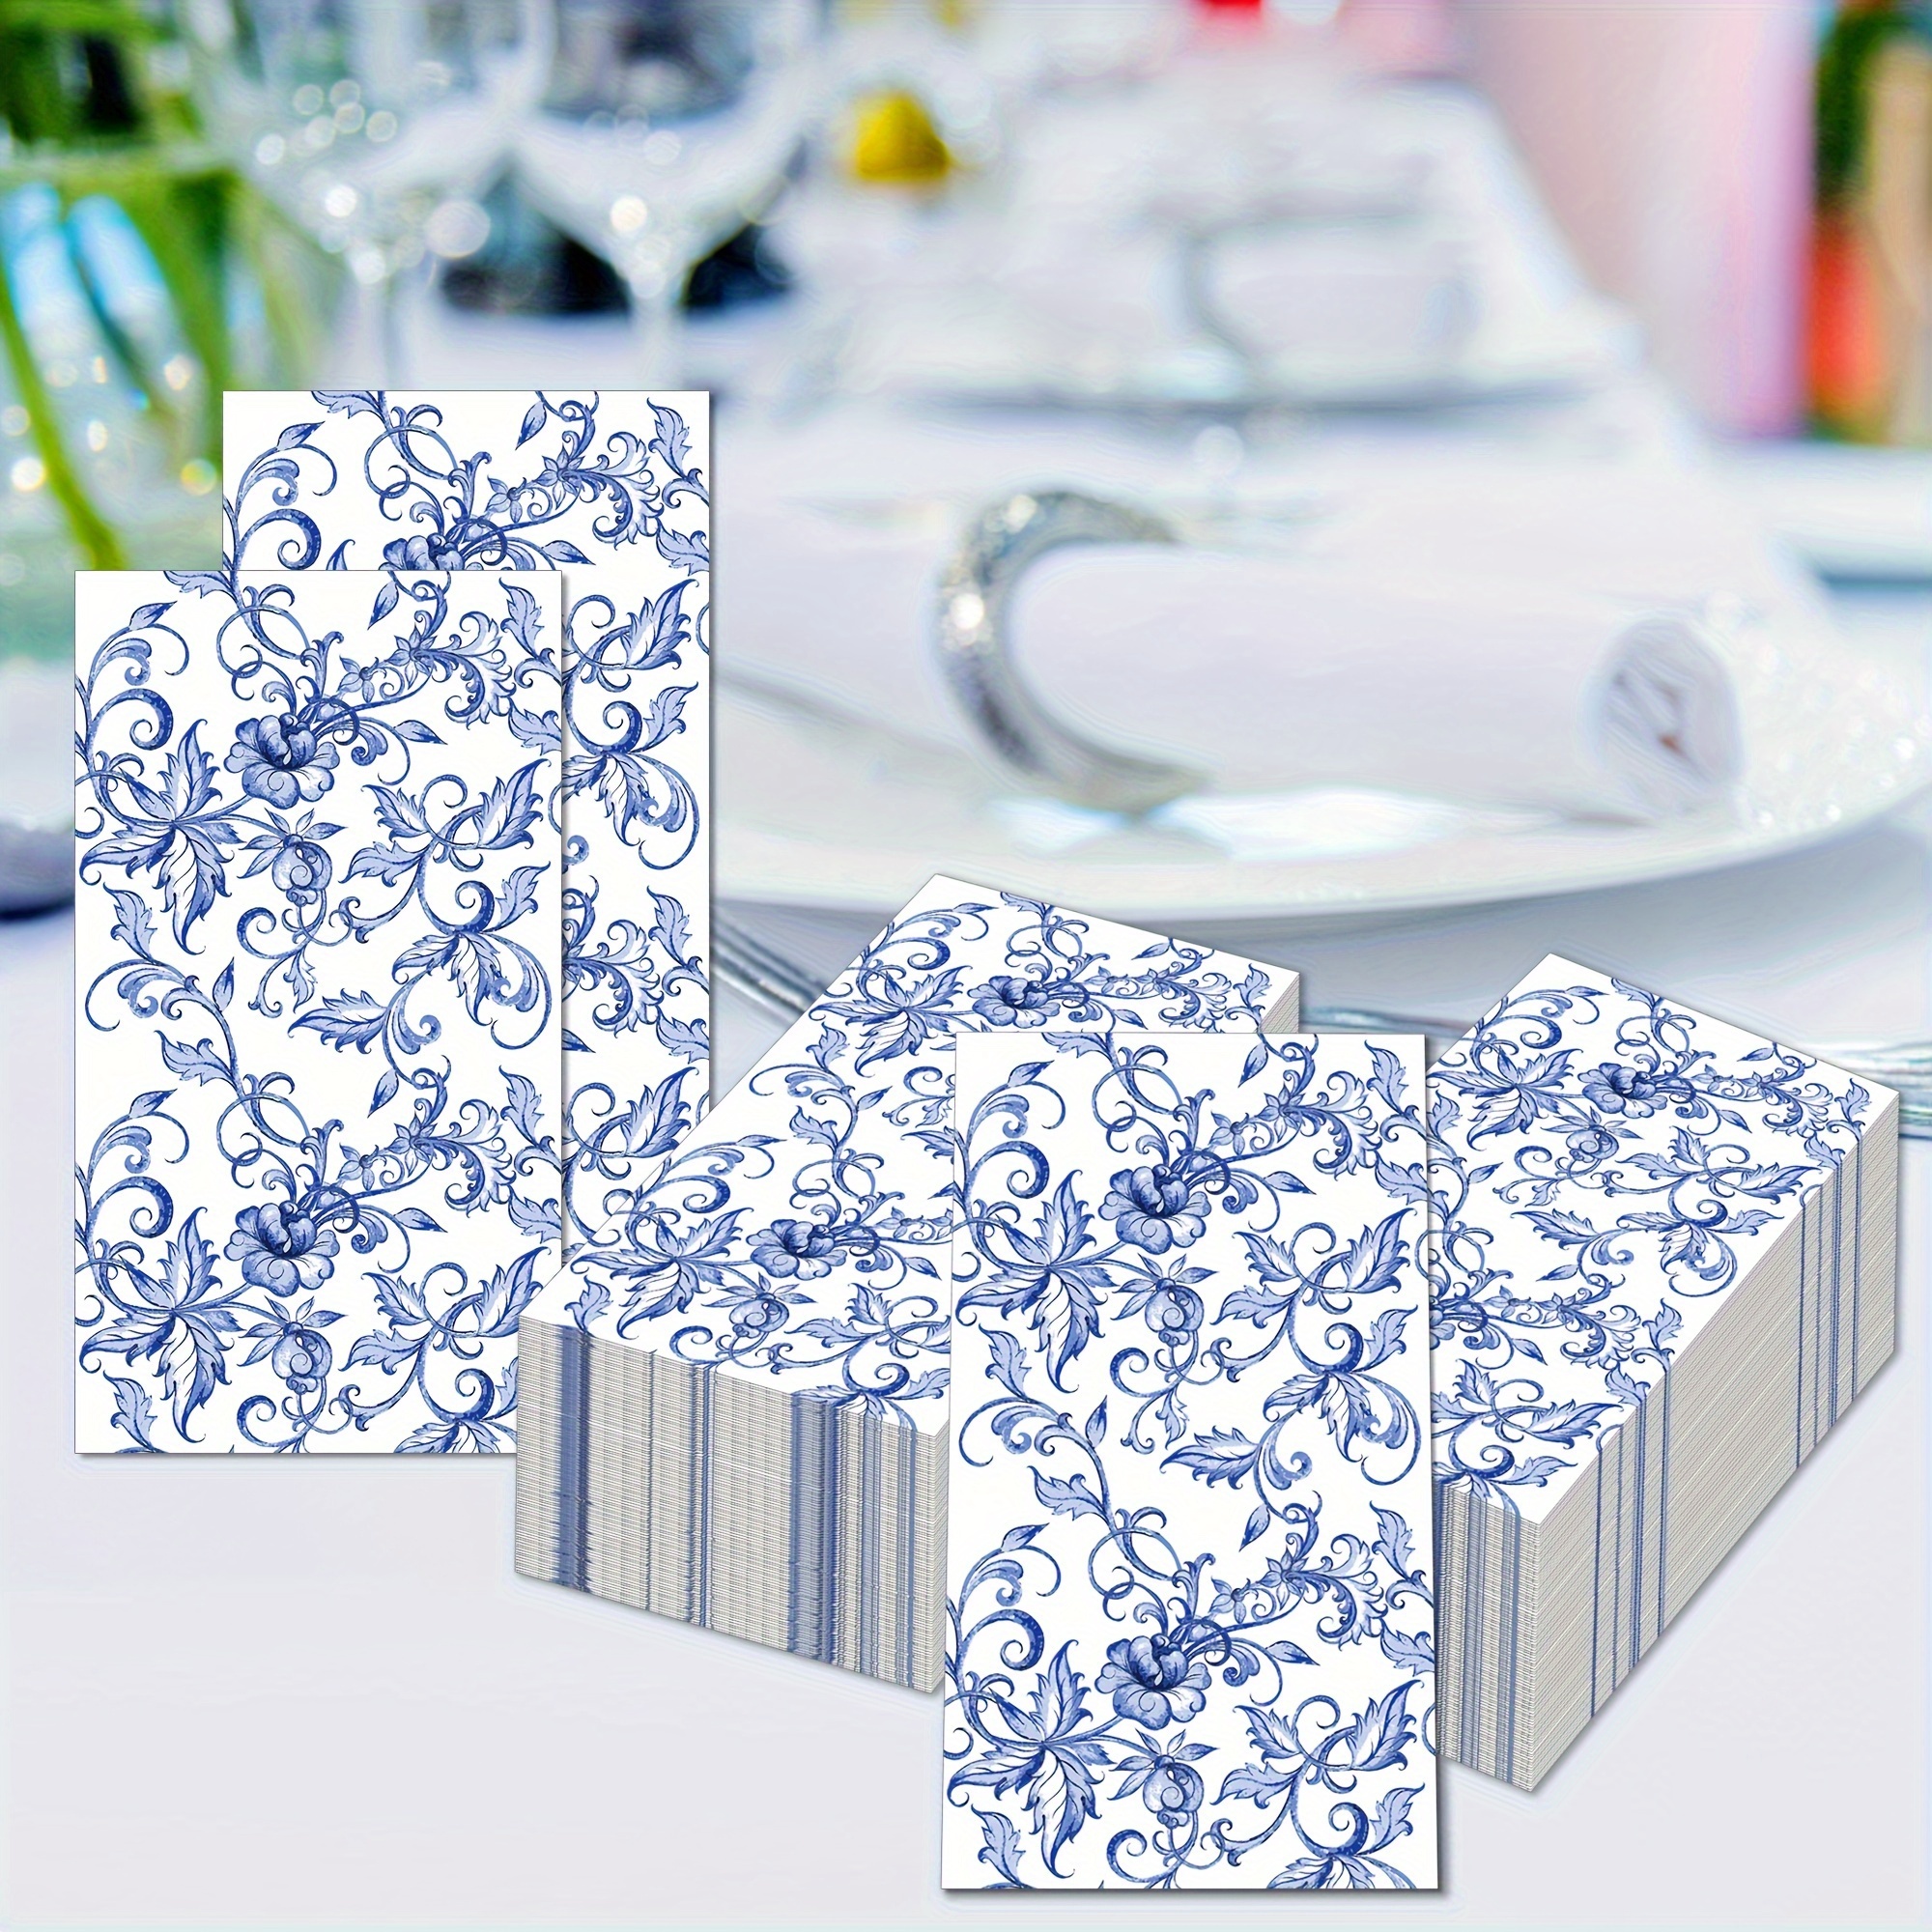 

Set, Chinese Porcelain Pattern Long Paper Napkins, Blue And White Porcelain Tissues, Birthday Home Party Tableware Paper Decor, Party Decor, Party Supplies